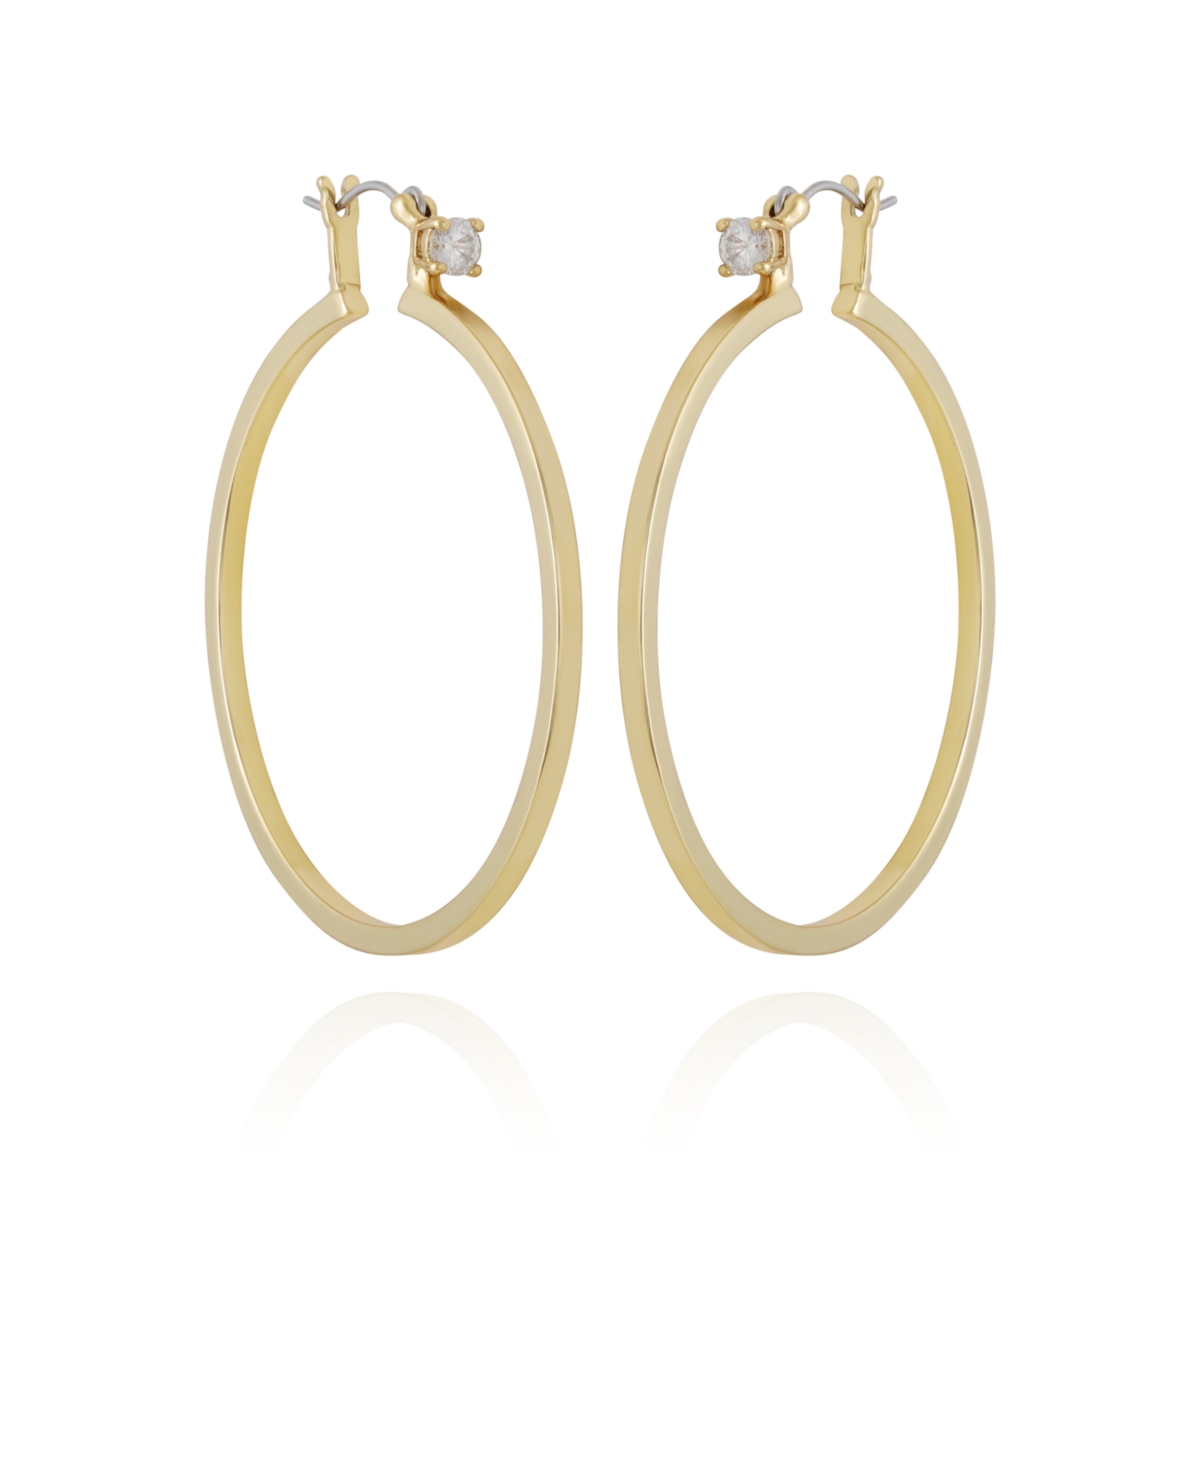 Gold-Tone Cubic Zirconia Large Hoops Earrings - Gold